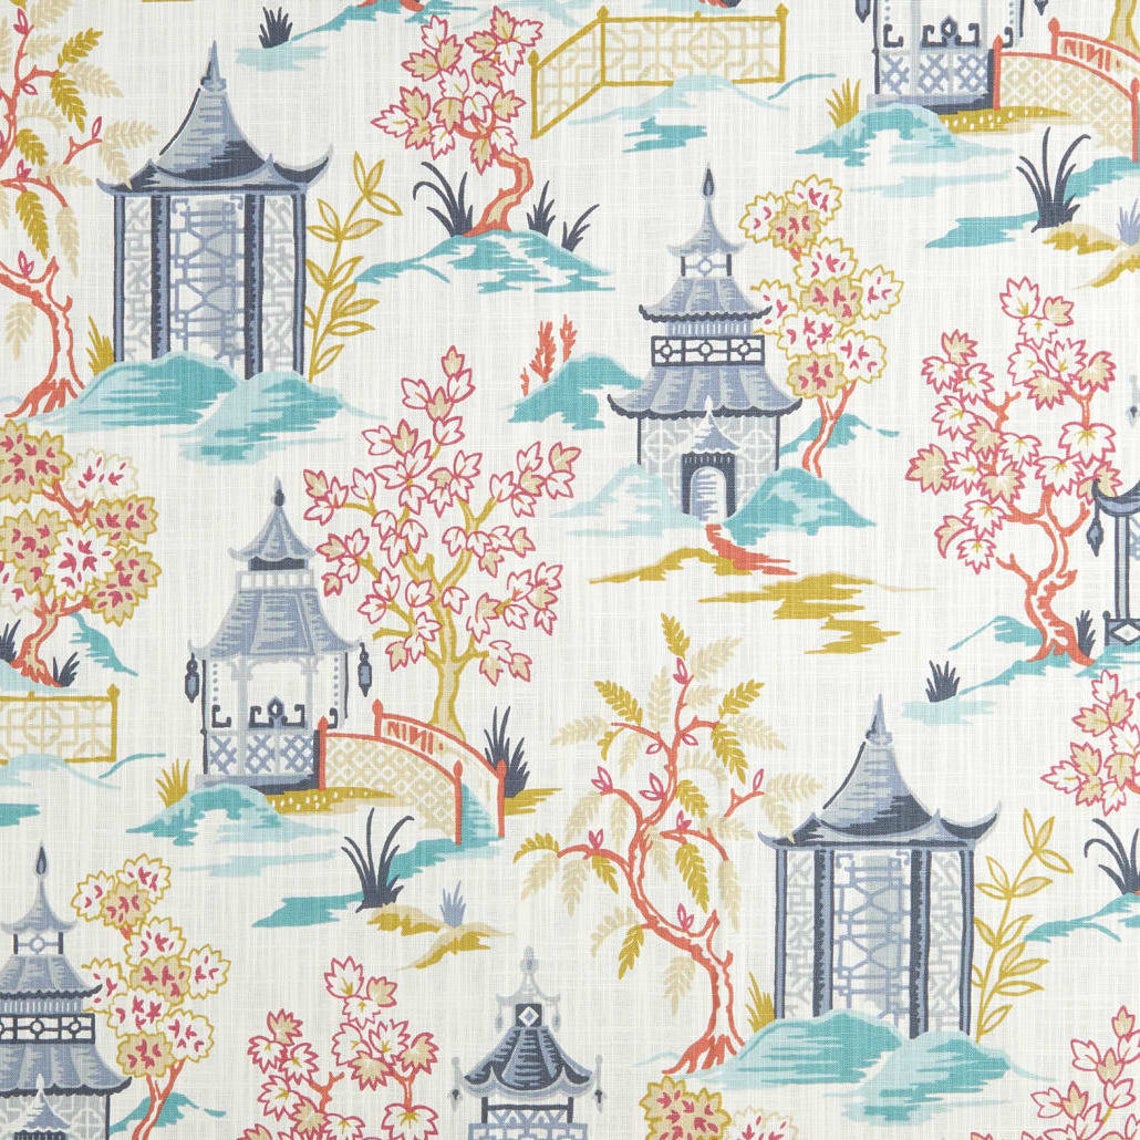 tie-up valance in shoji summer oriental toile, multicolor chinoiserie